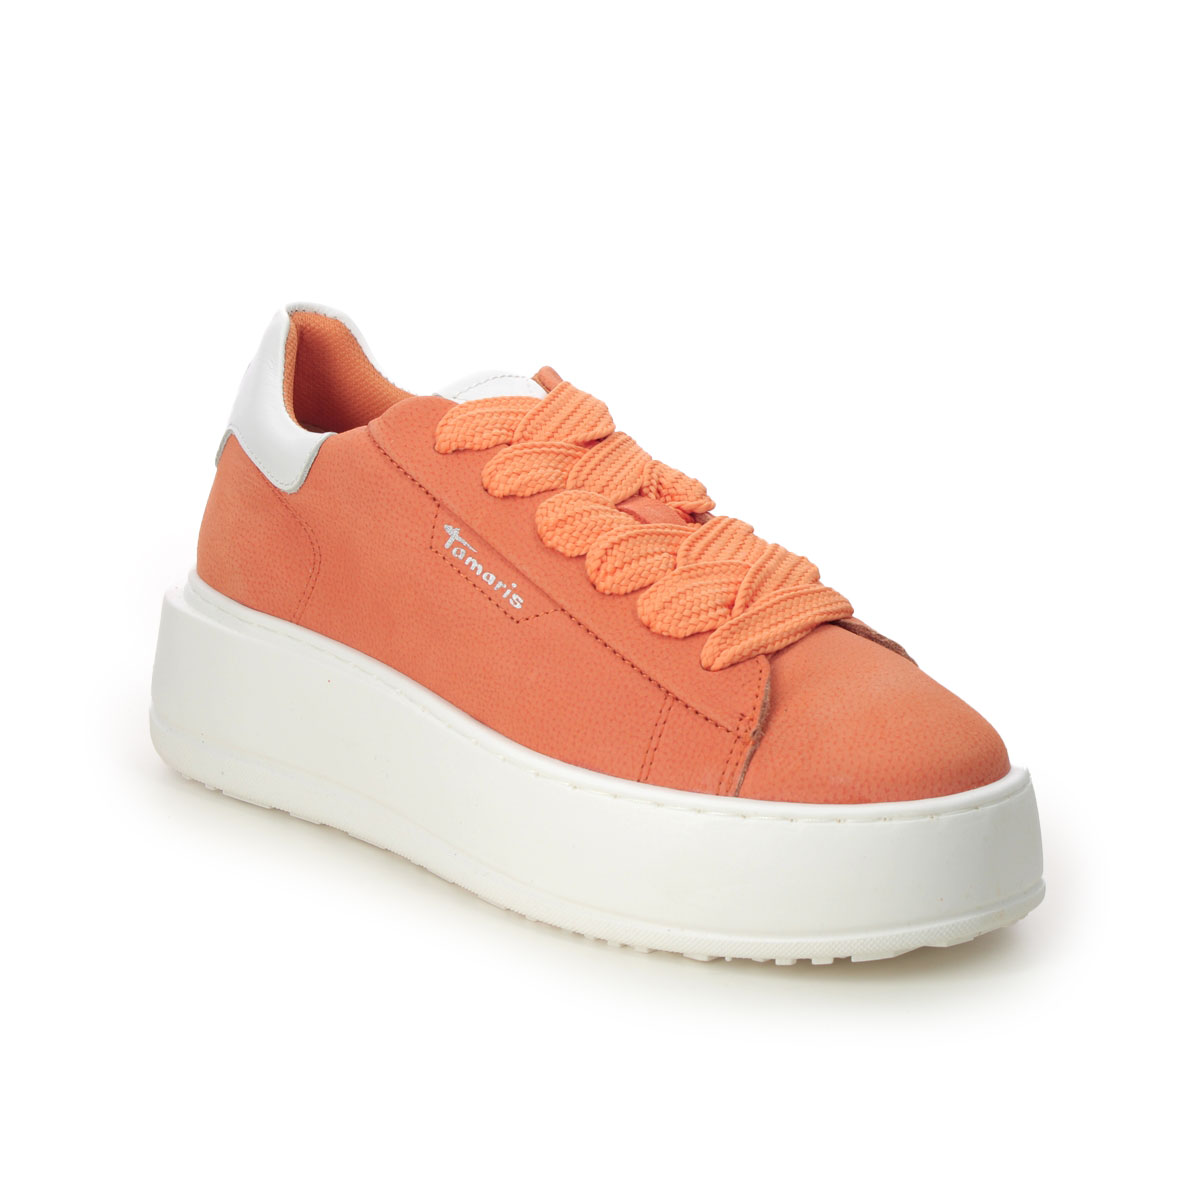 Tamaris Platform 50 Orange Womens trainers 23812-41-606 in a Plain Leather in Size 39